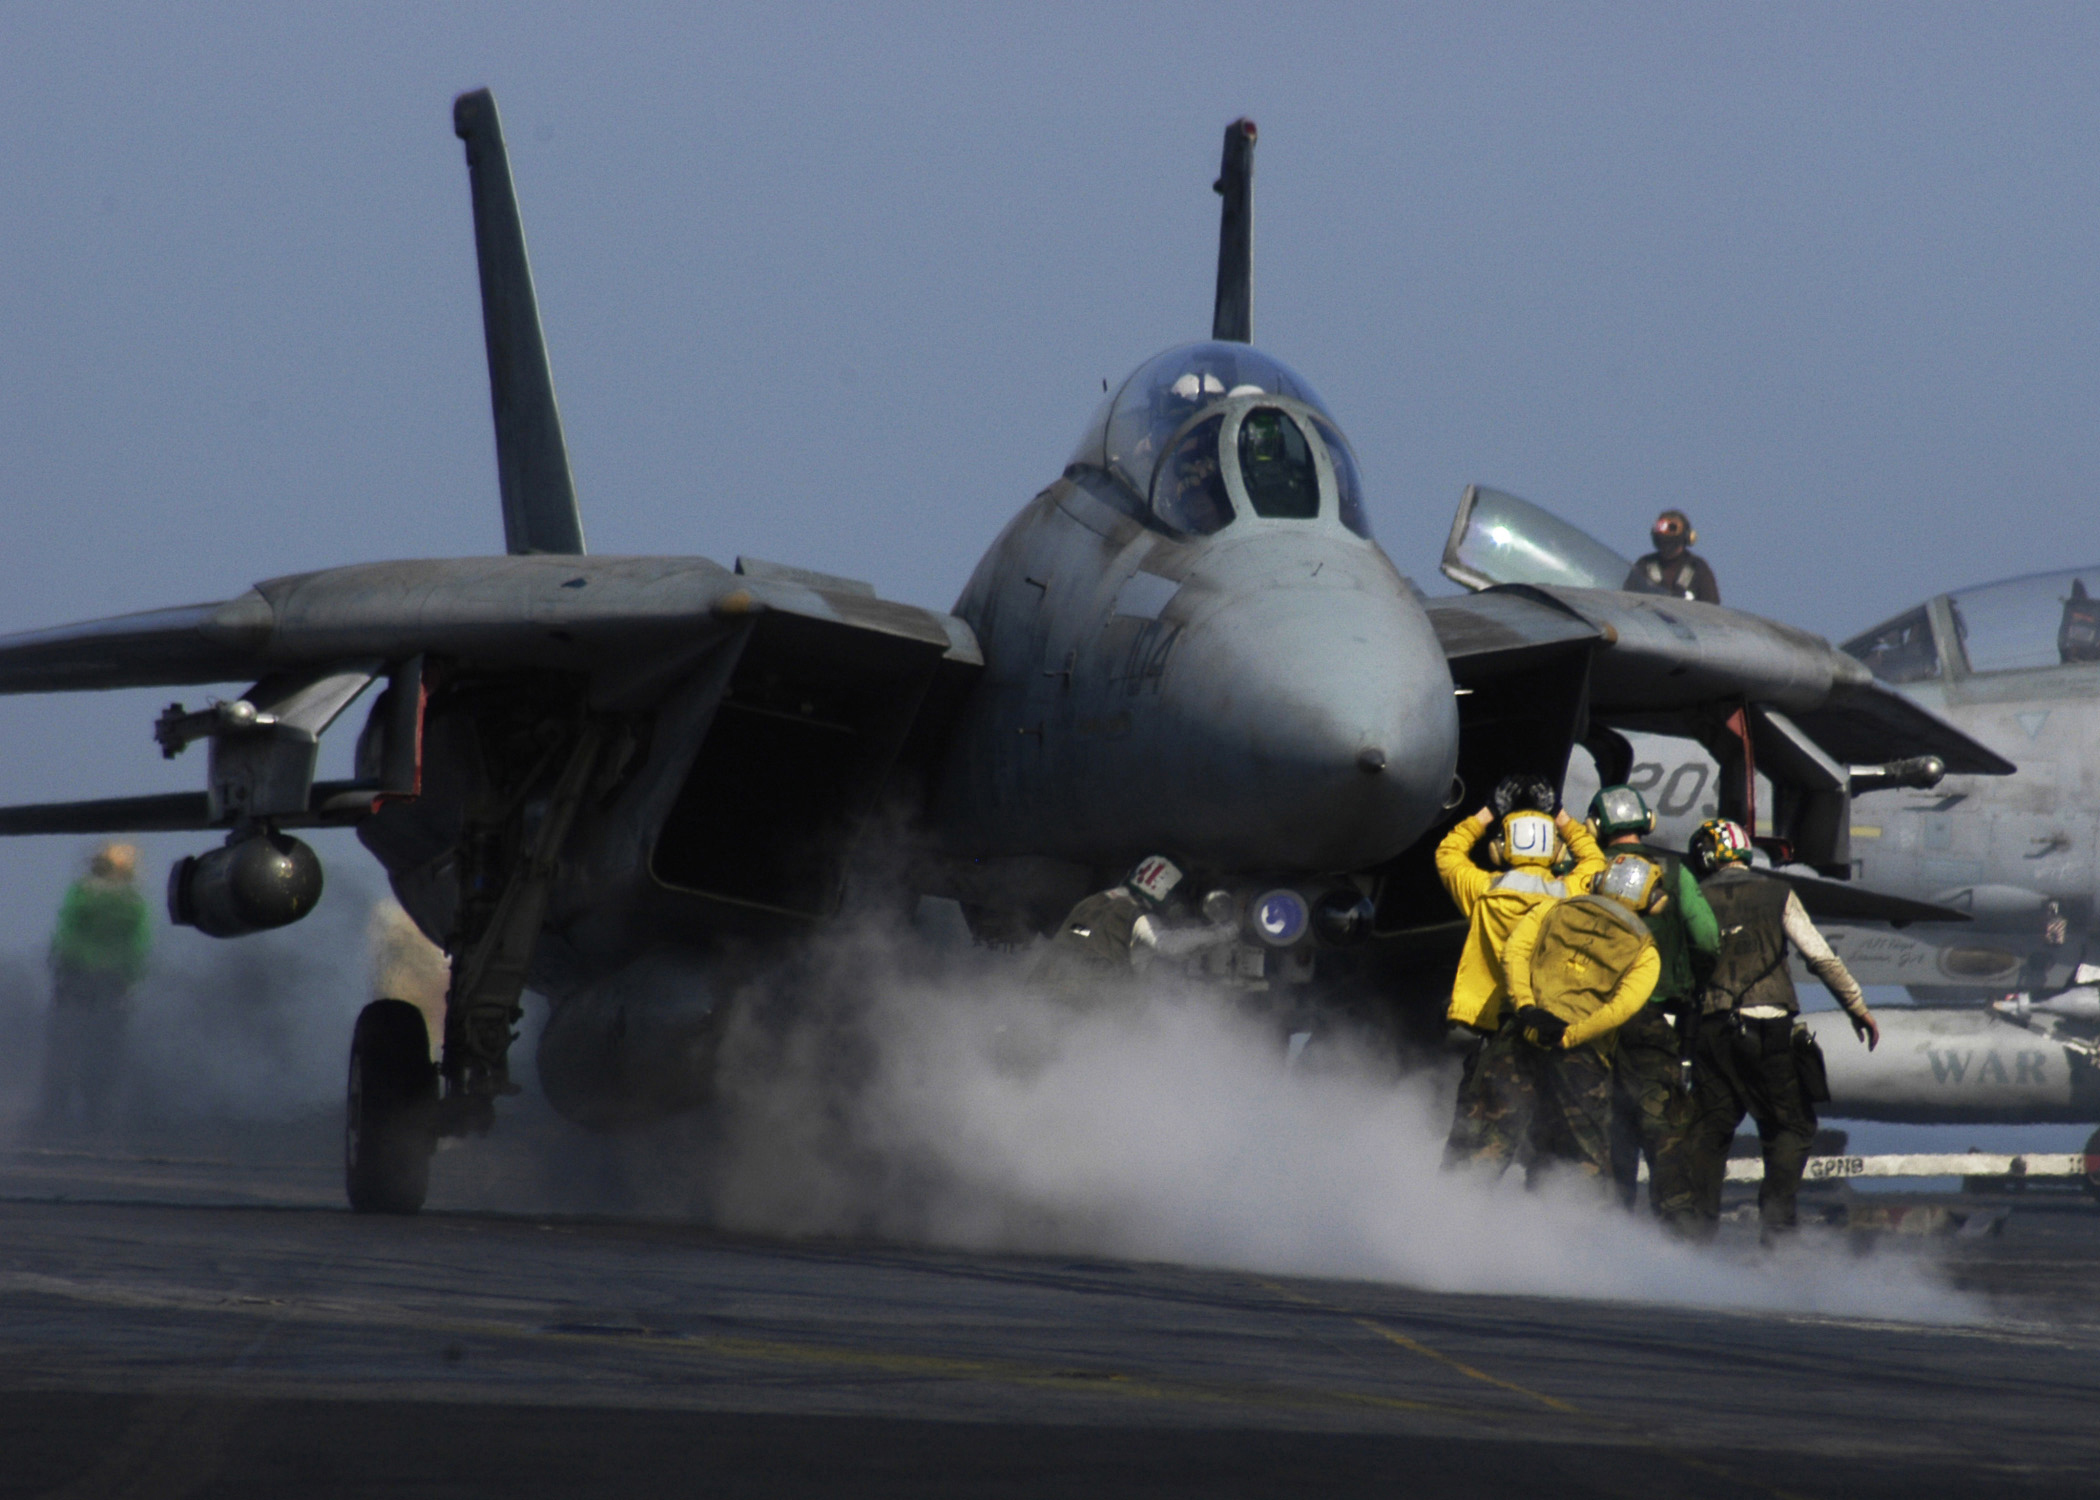 An F-14 Tomcat fighter arriving on the catapult.